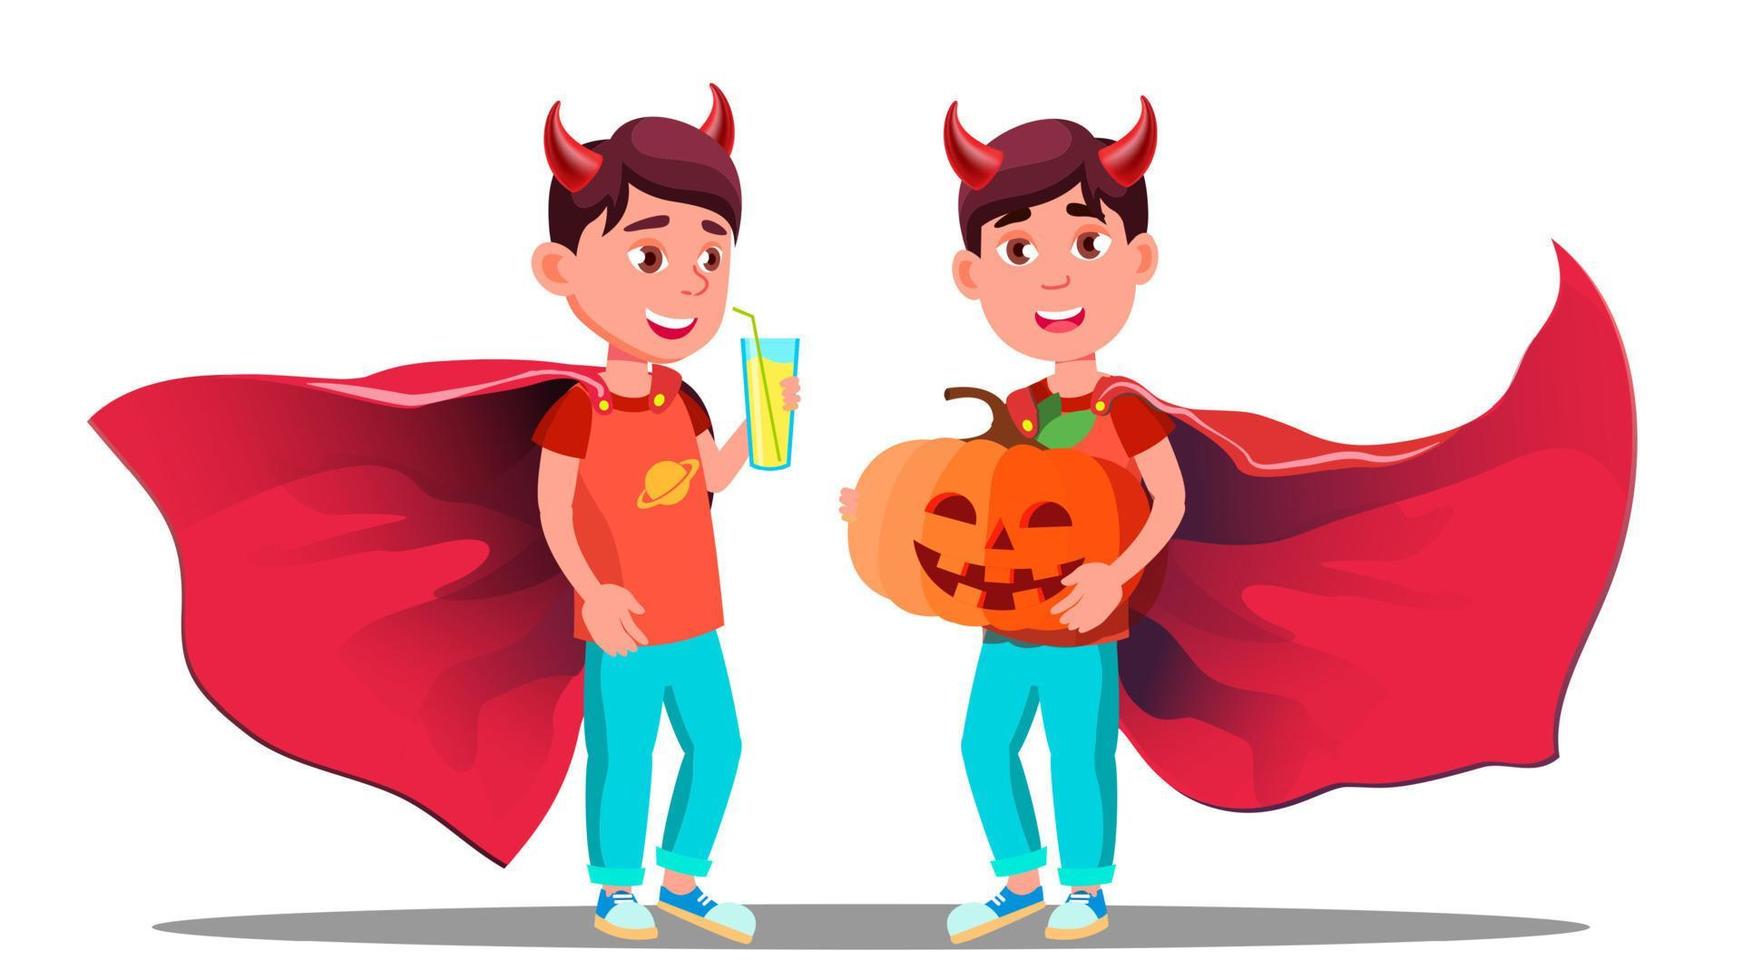 Little Boy With Devil Horns, Cloak And Holding Pumpkin In Hands Vector. Halloween Isolated Illustration vector